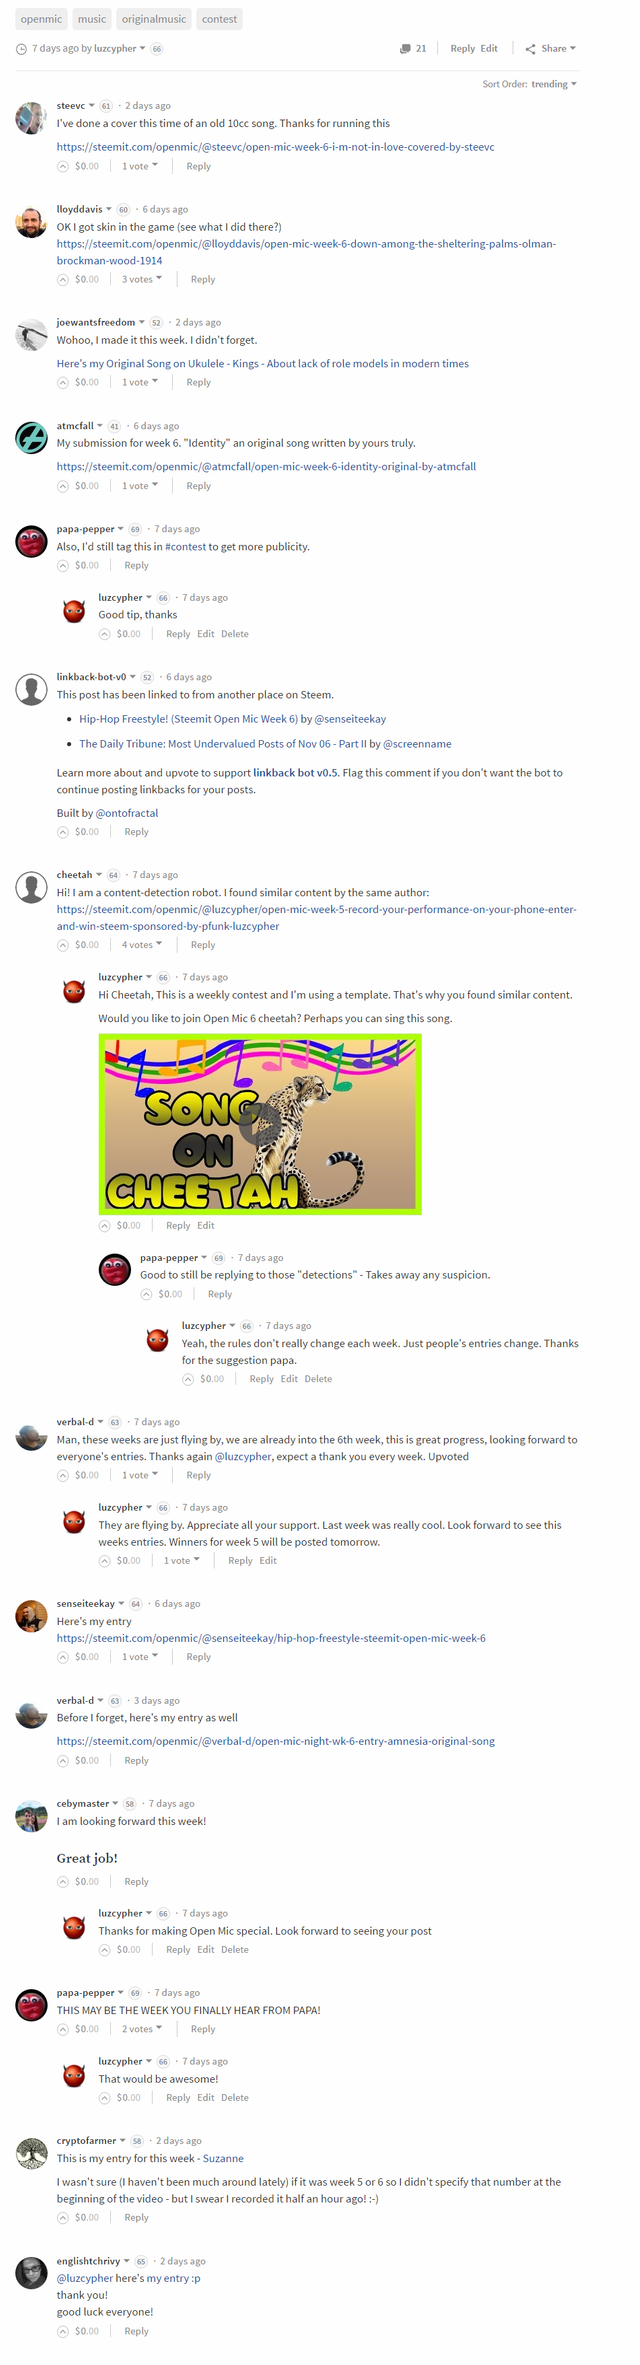 open-mic-week-7-comments.png